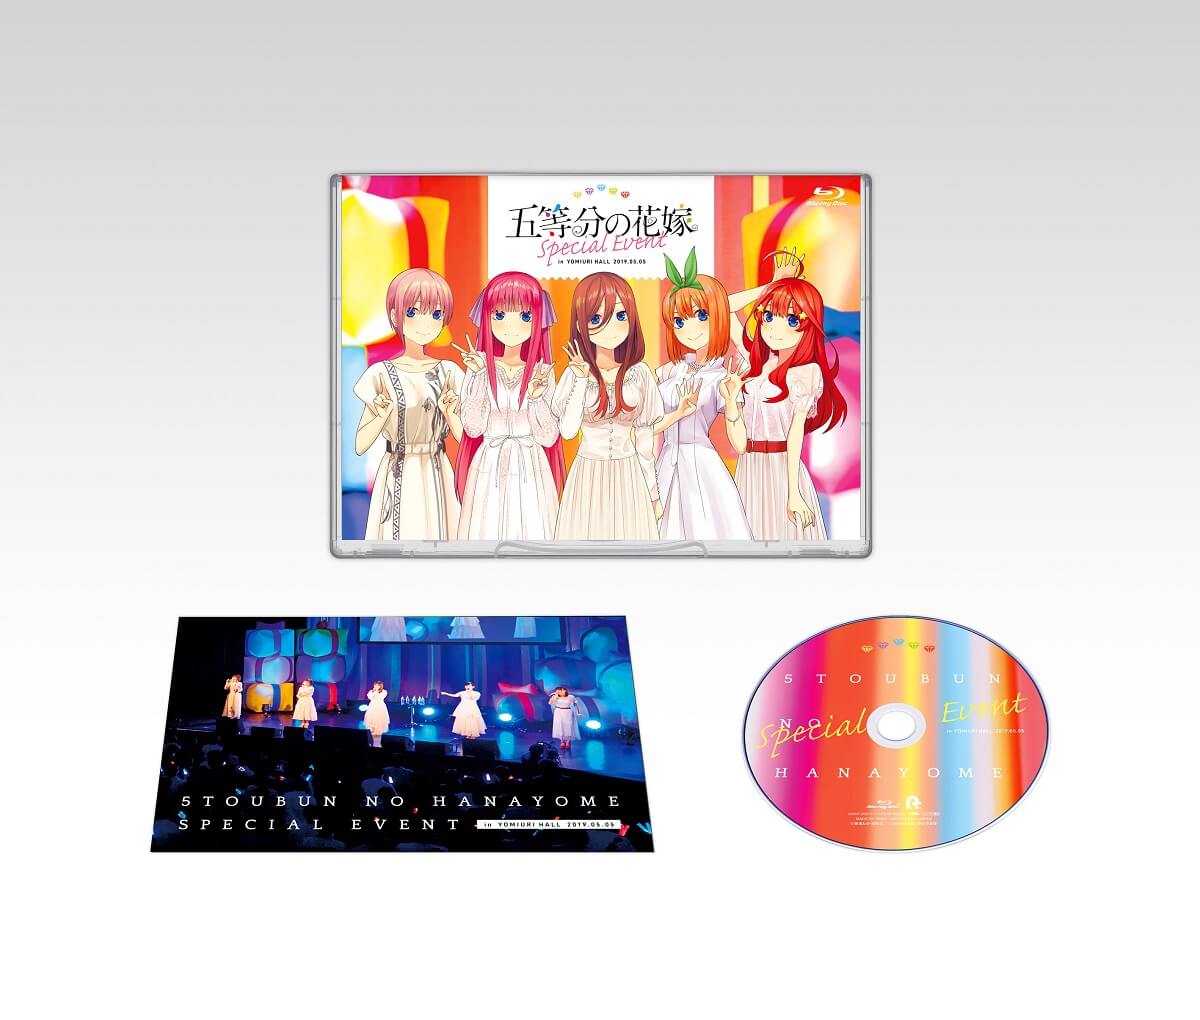 AnimeTV チェーン on X: The Quintessential Quintuplets Movie Japanese  DVD/Blu-ray release date set for December 21! ✨More:    / X